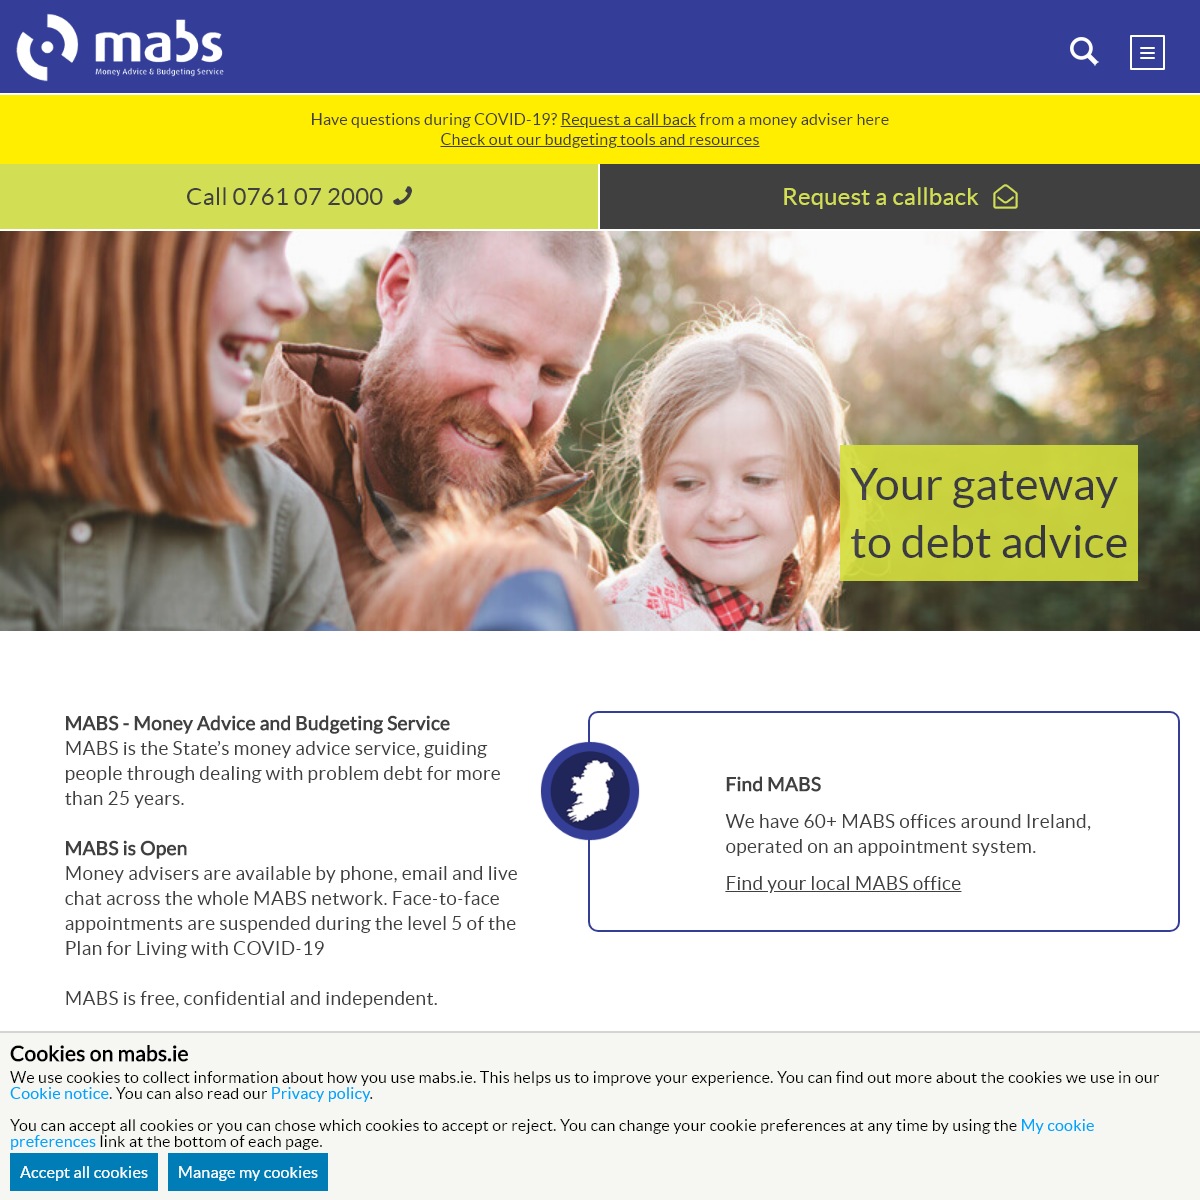 A complete backup of mabs.ie